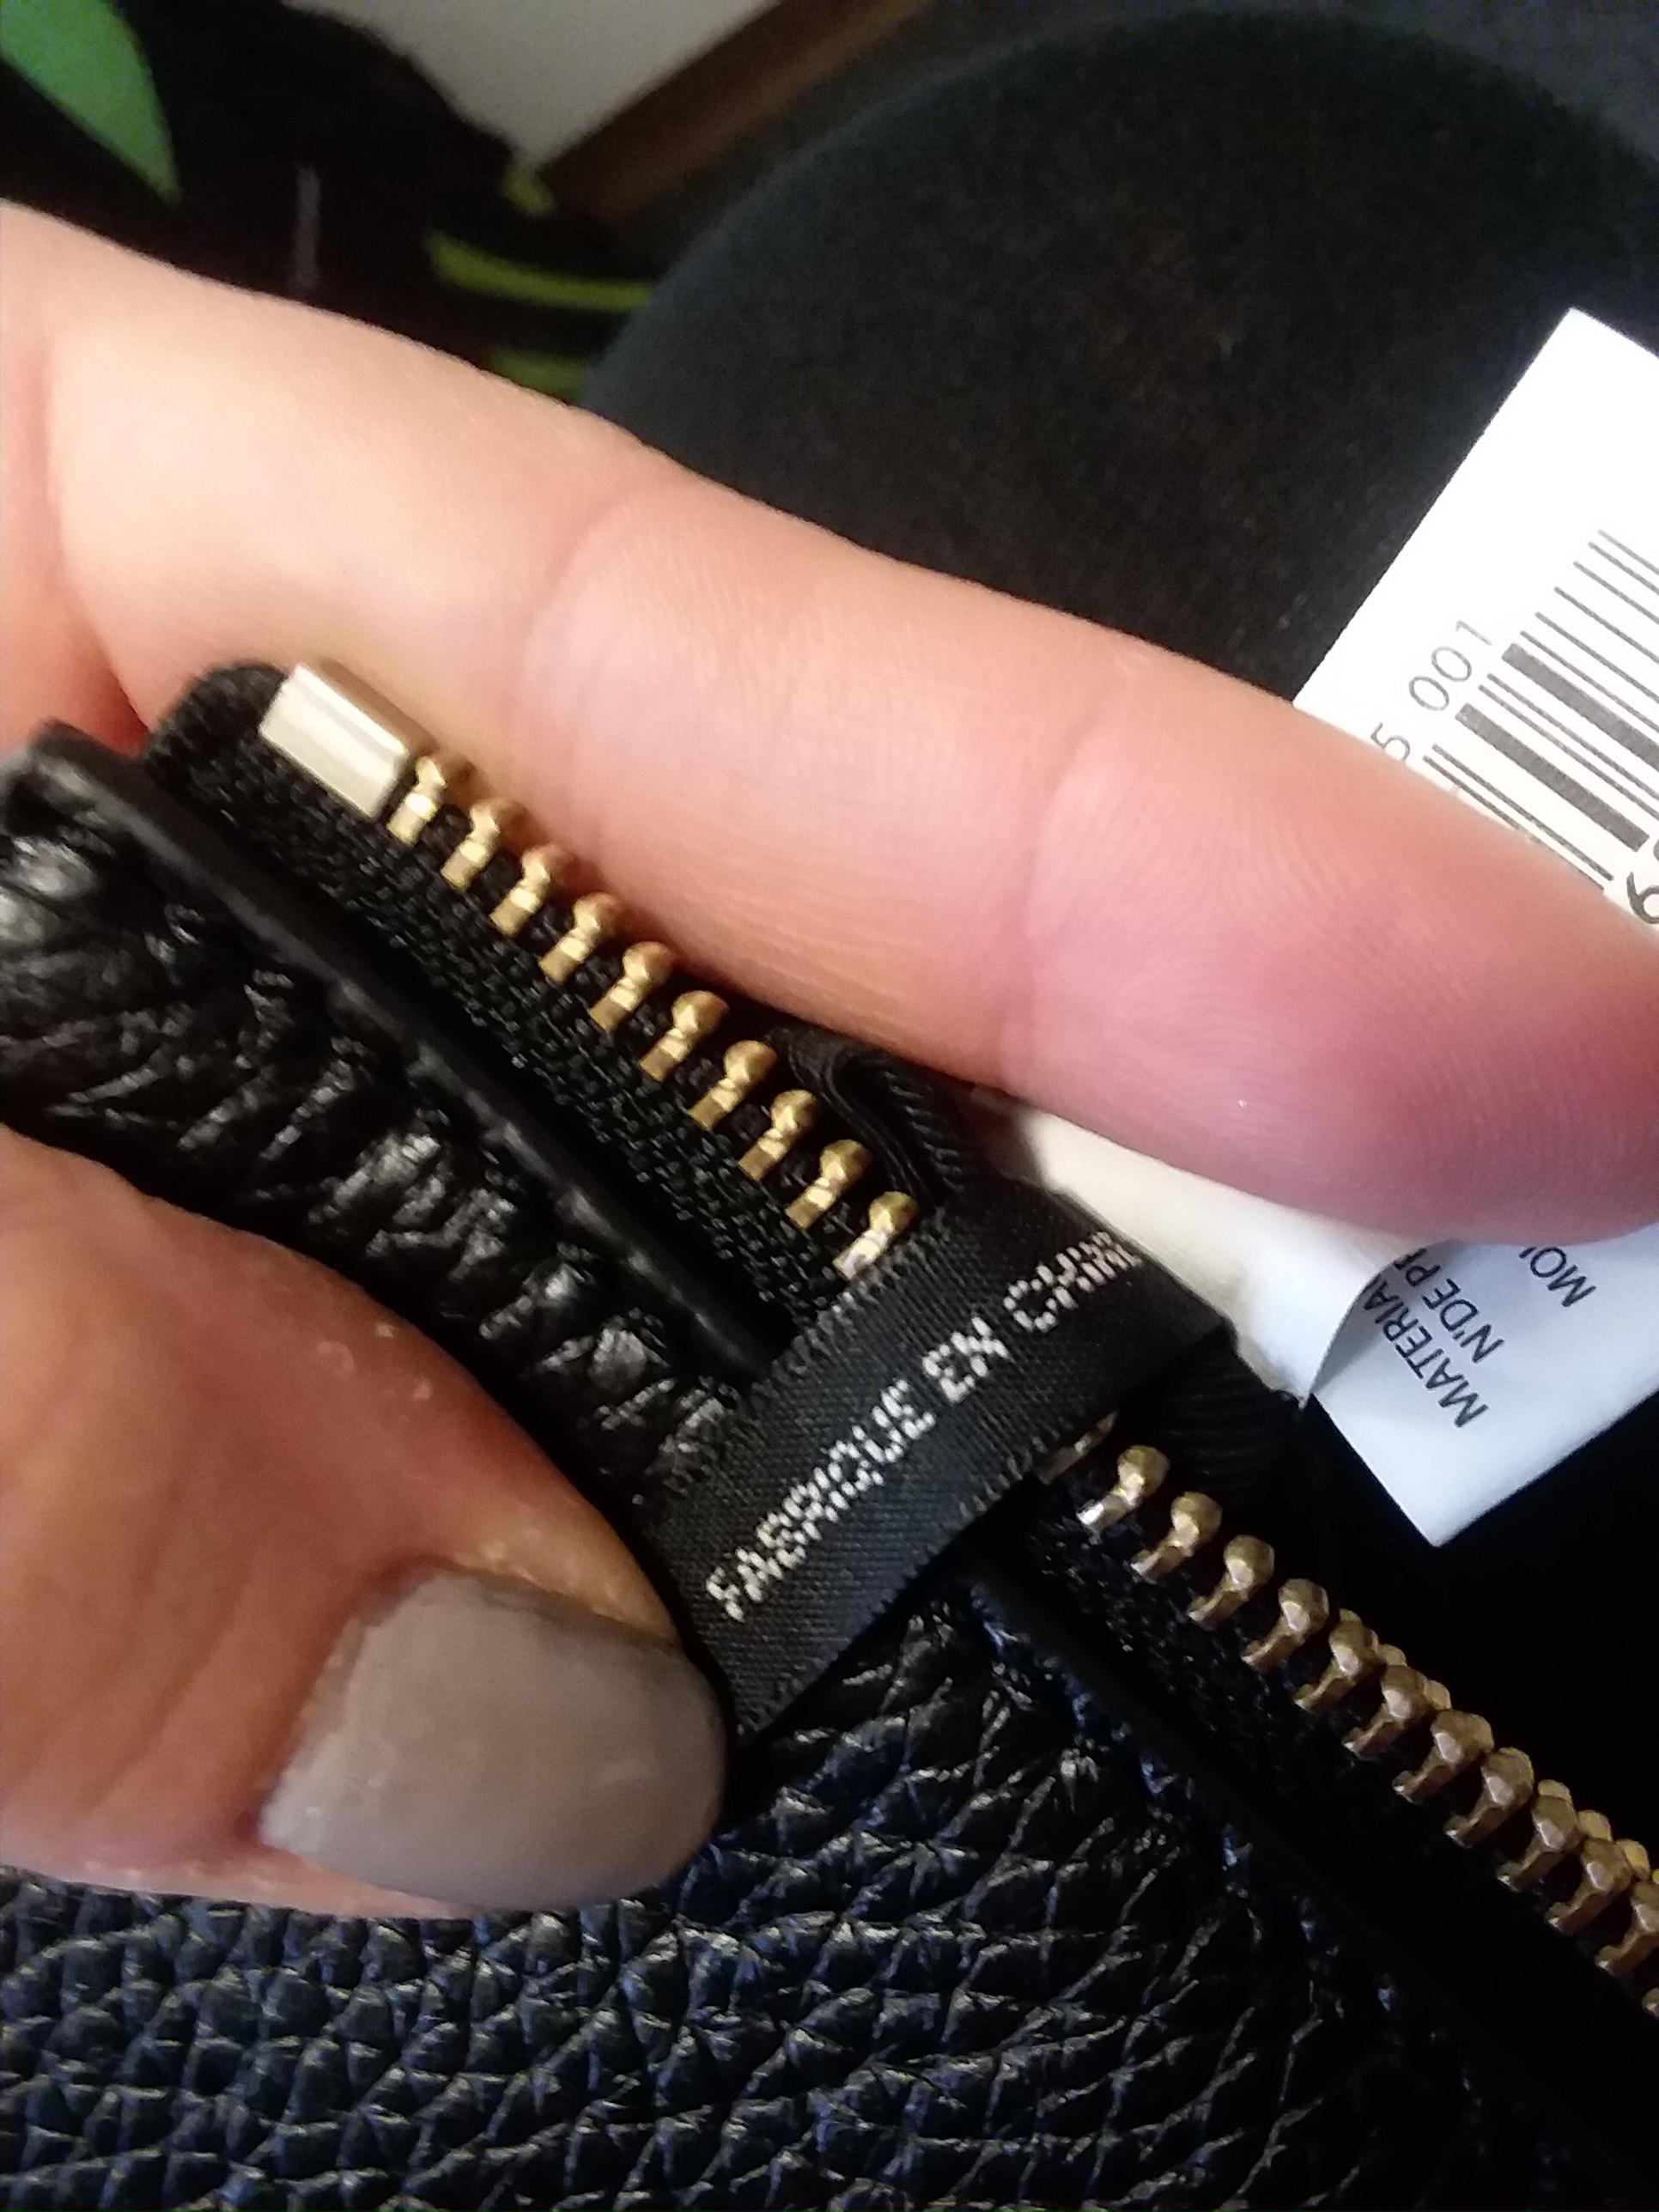 CLOSED - Authenticate This Marc Jacobs, Page 738